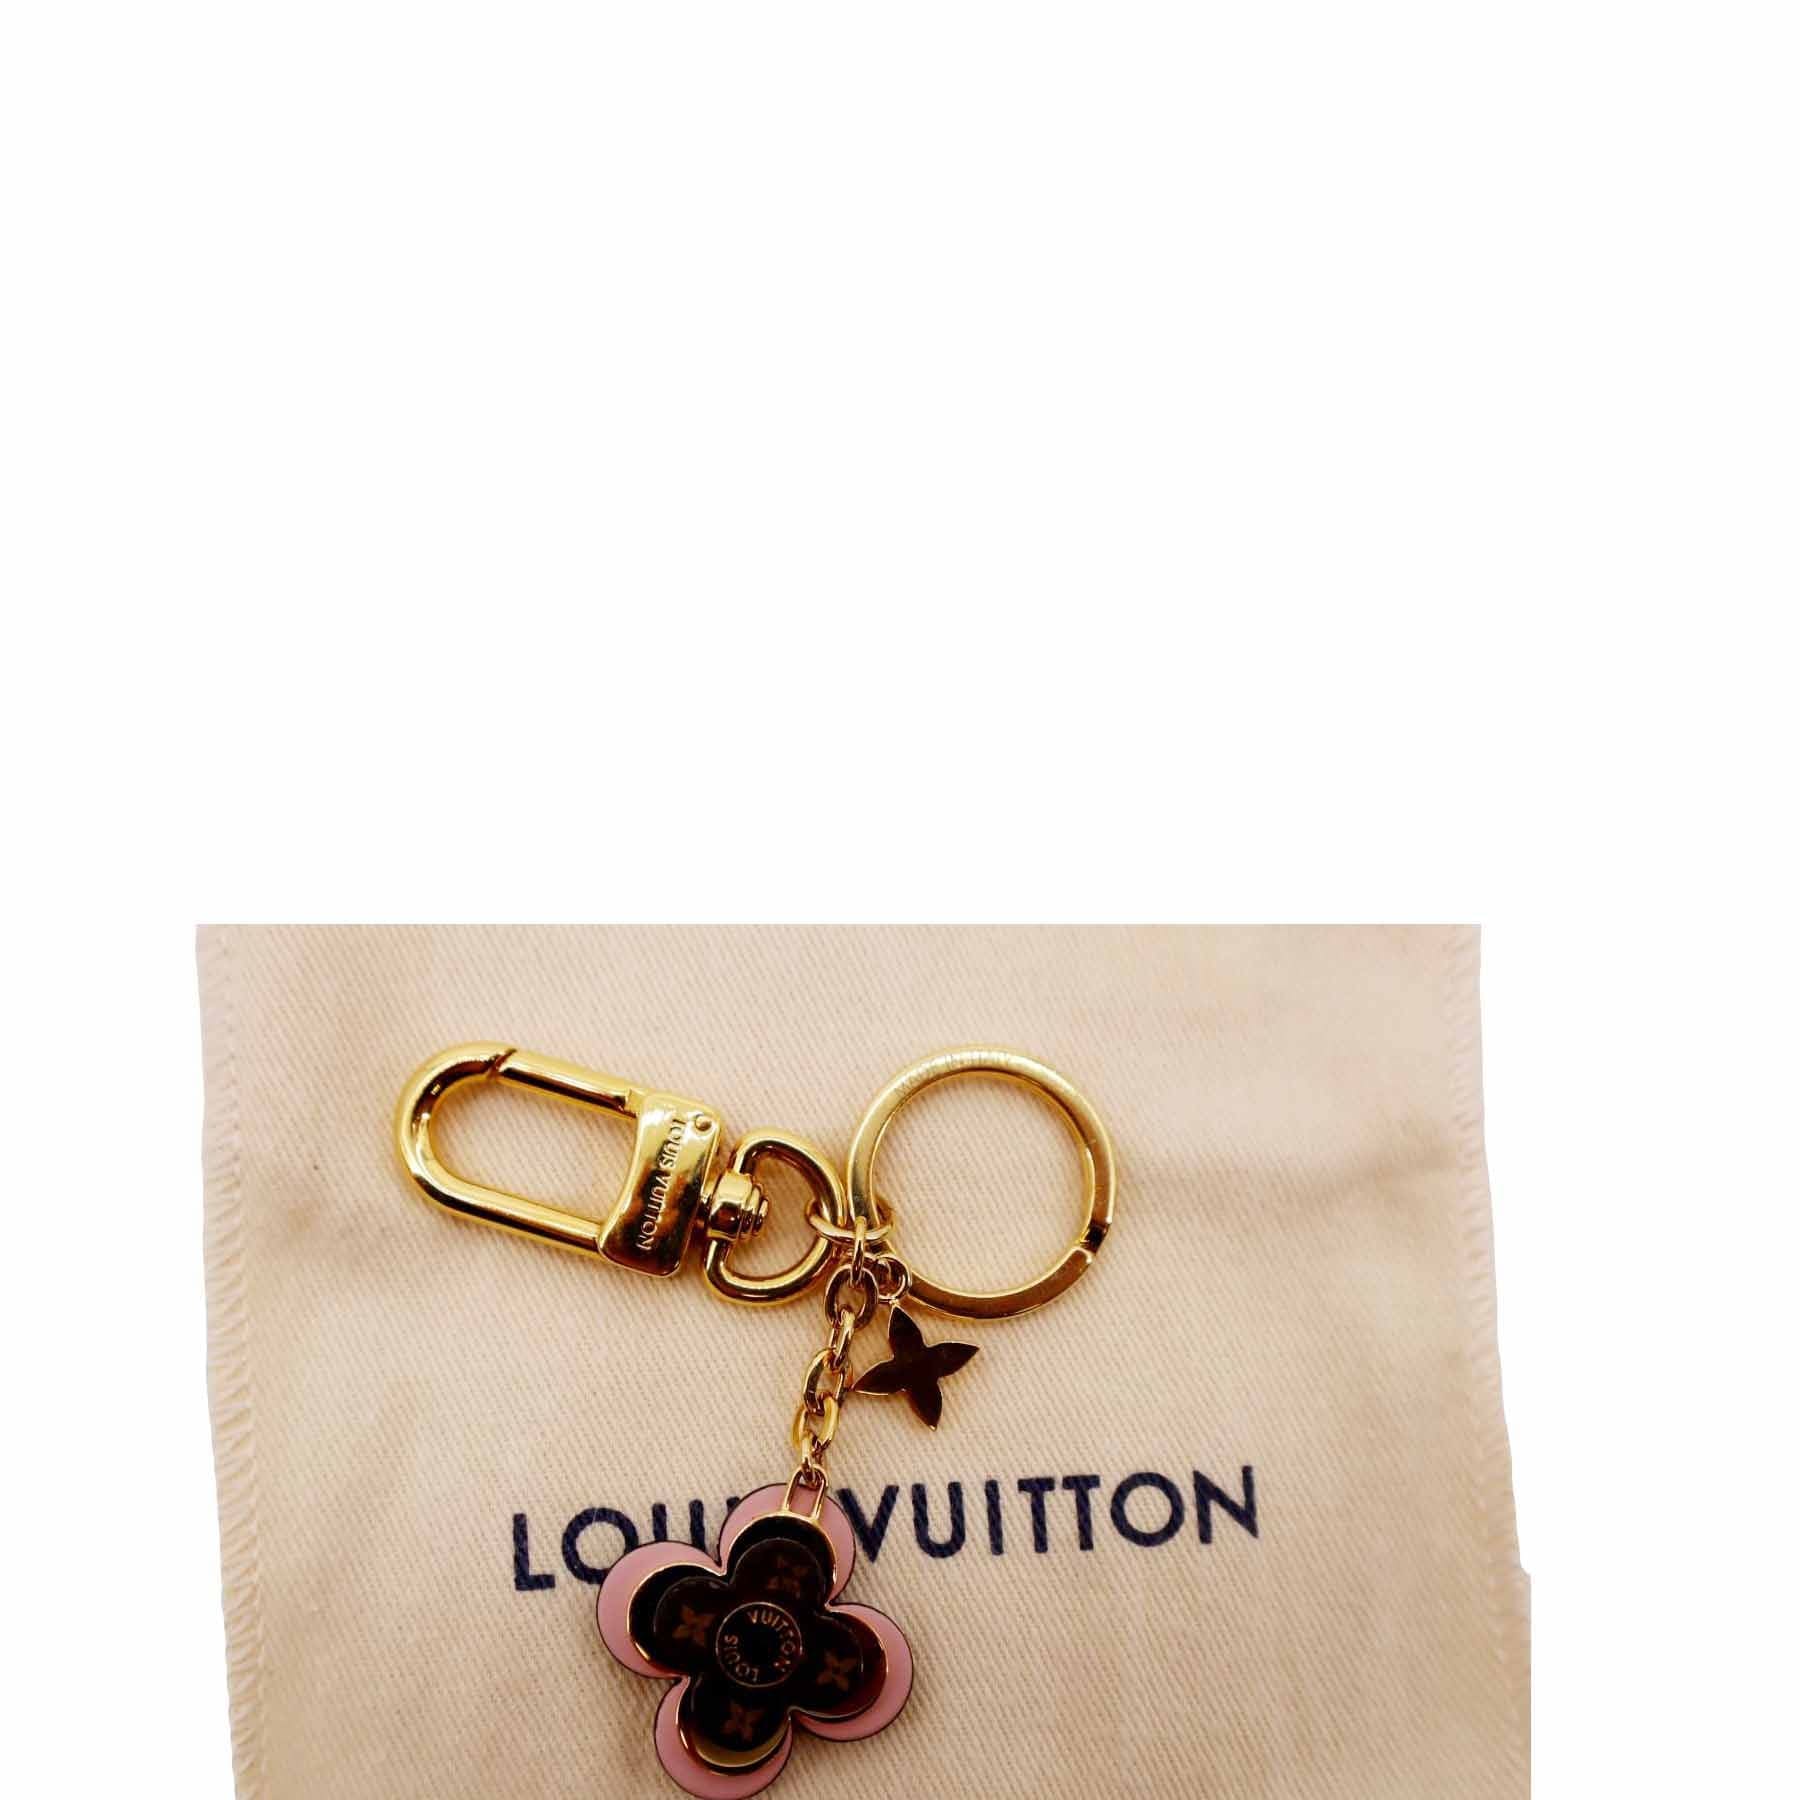 Blooming Flowers BB Bag Charm and Key Holder S00 - Women